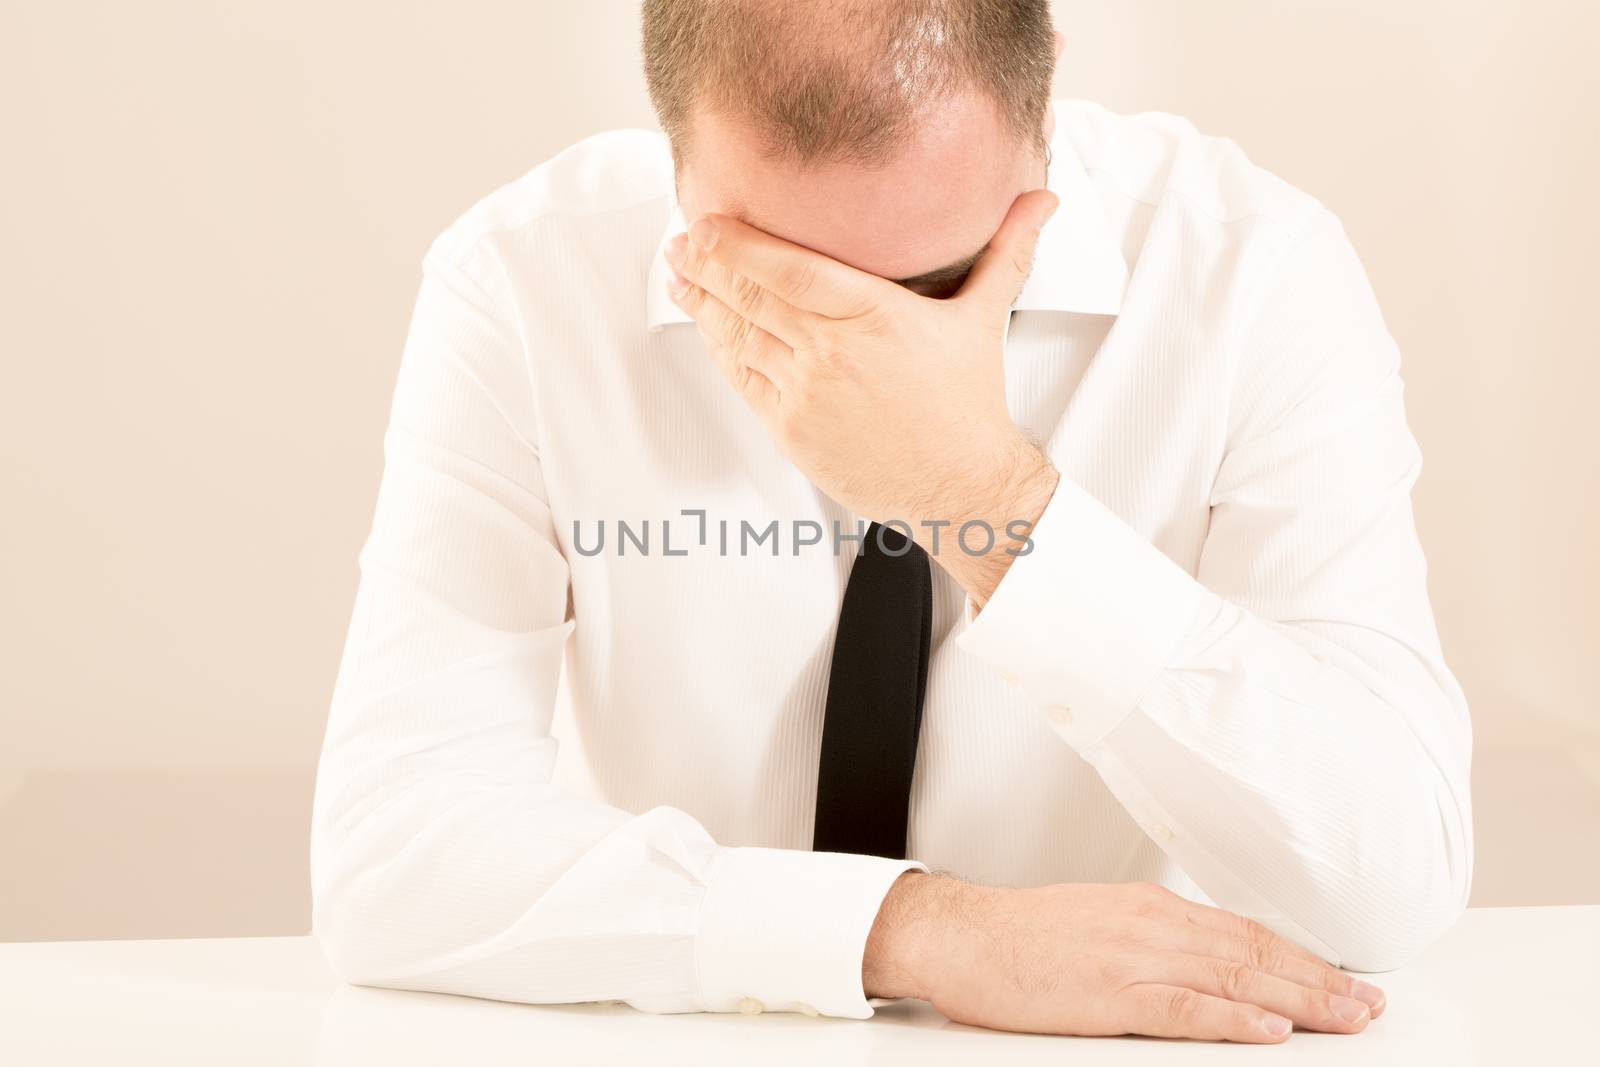 Burn out stress depression business man office white background